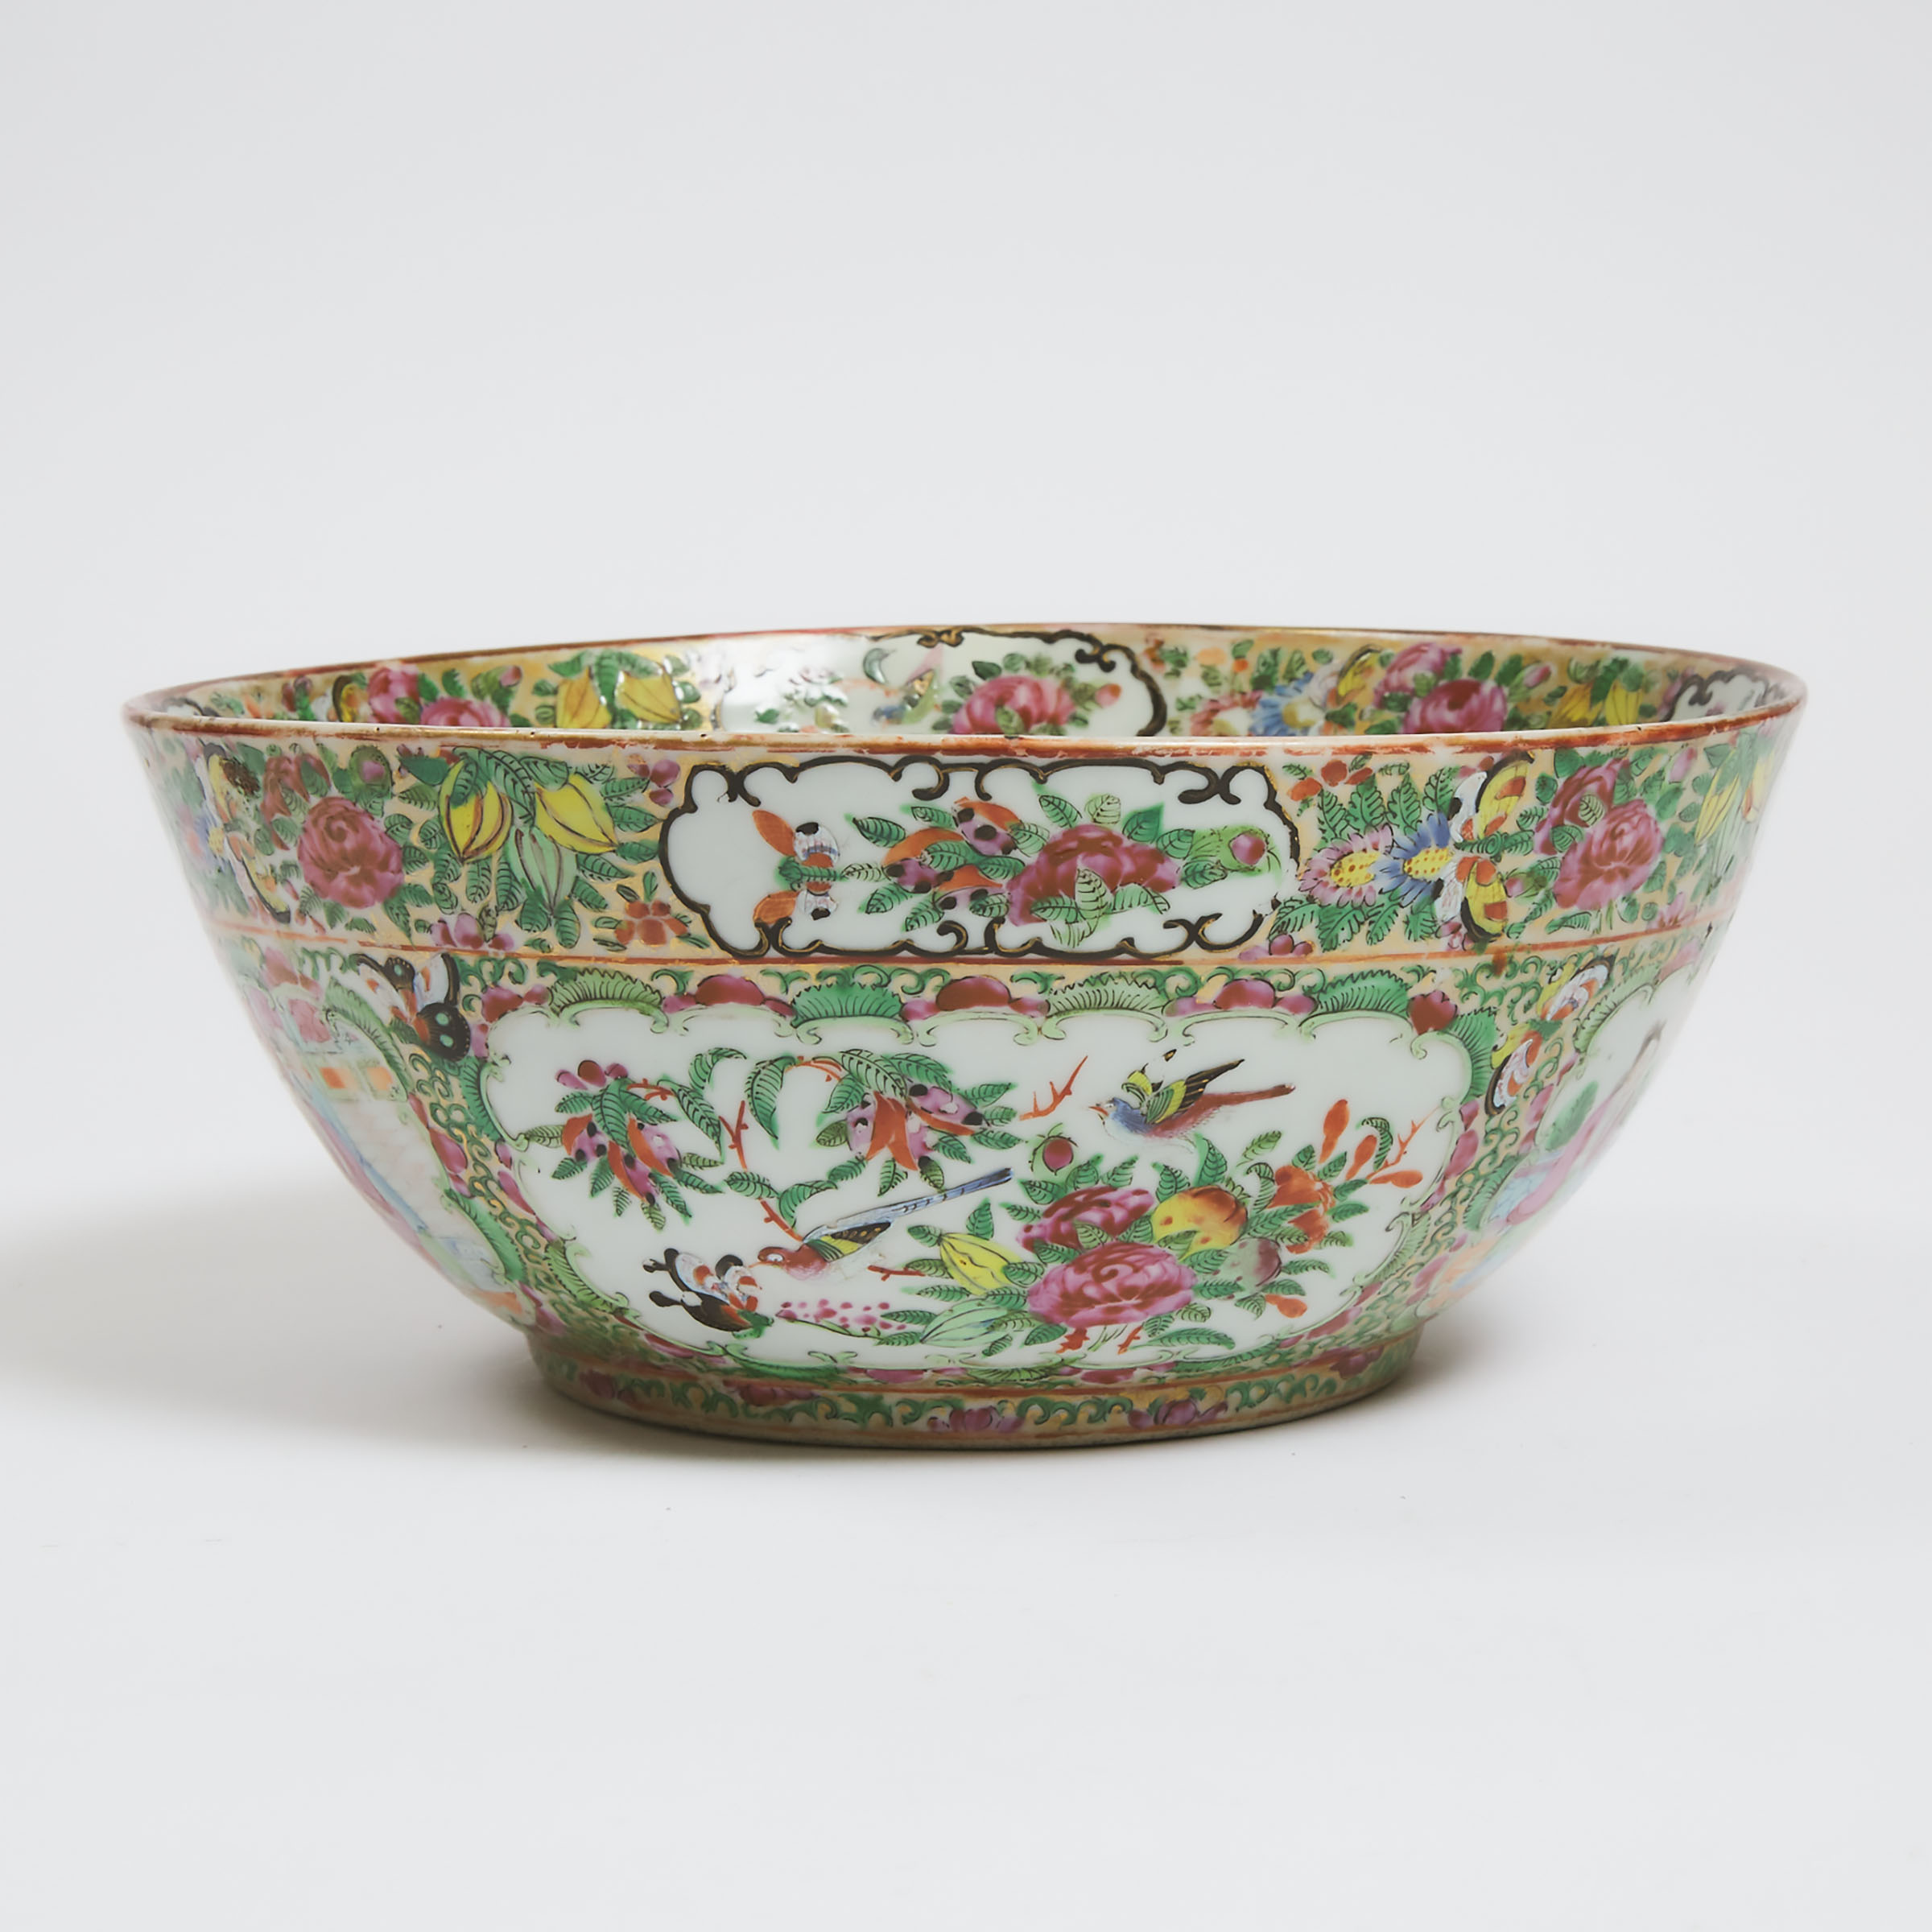 A Canton Famille Rose Punch Bowl, Early 19th Century